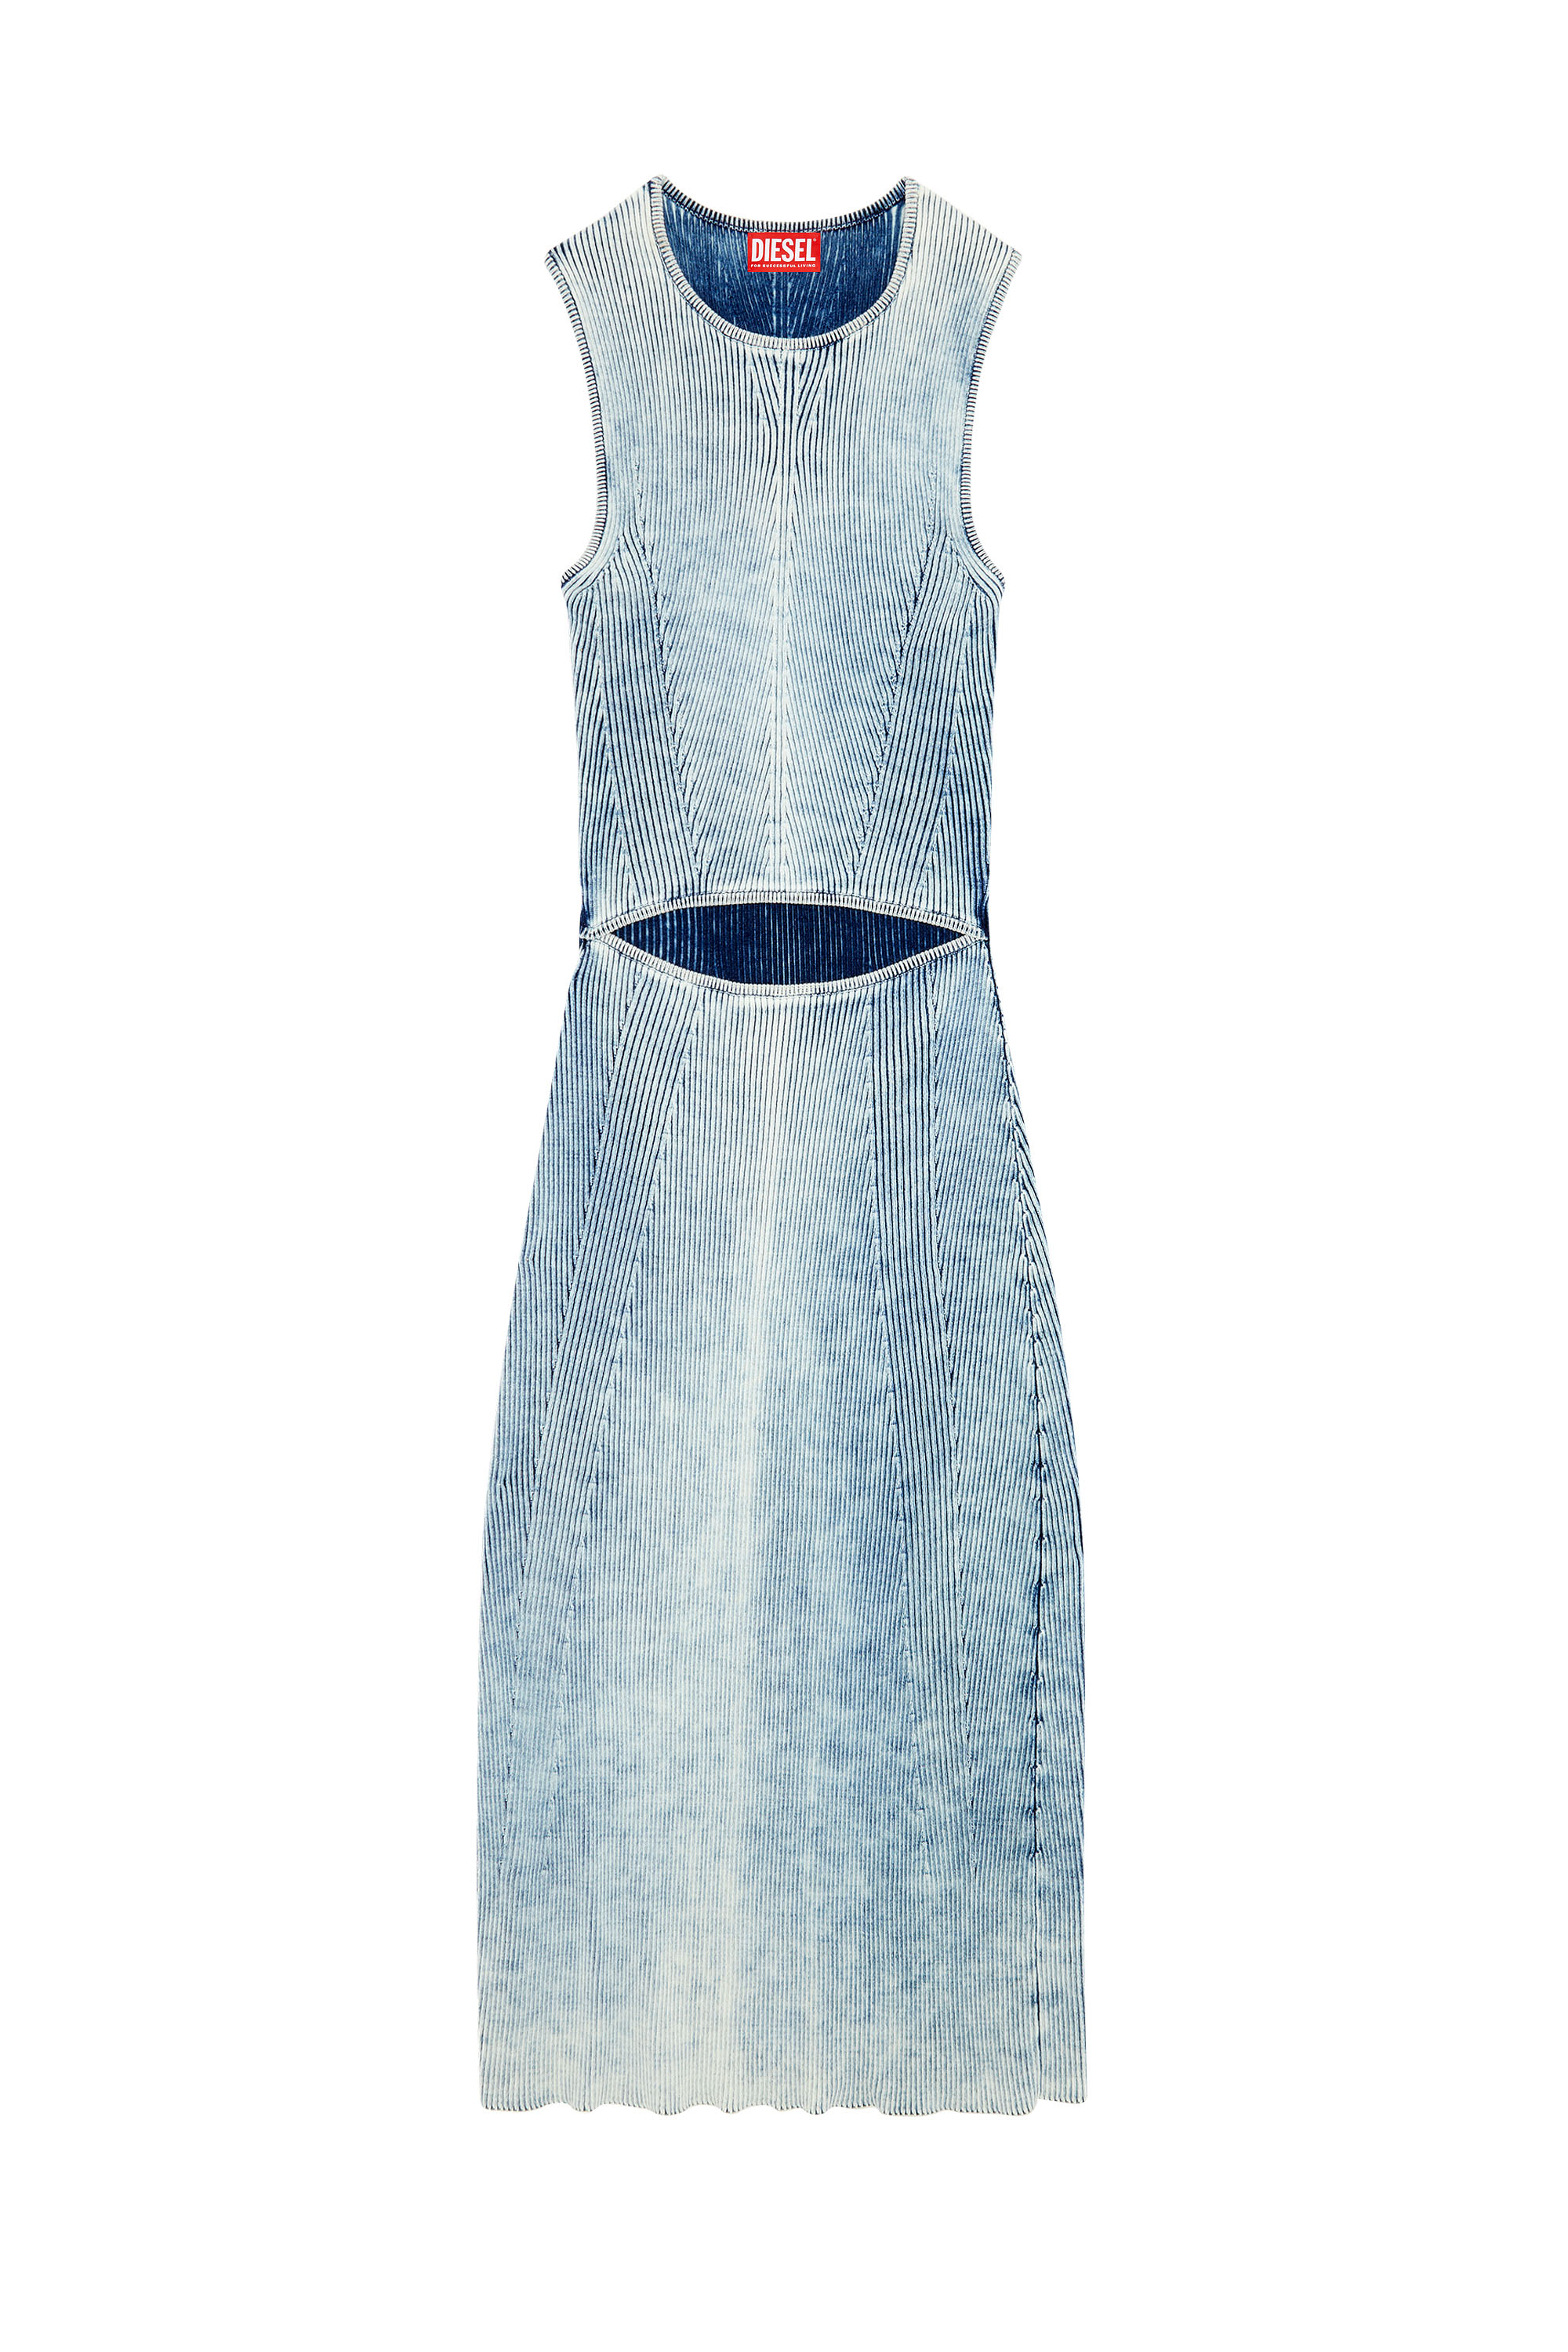 Women's Dresses and Jumpsuits: Ceremonial, Casual, Night | Diesel®